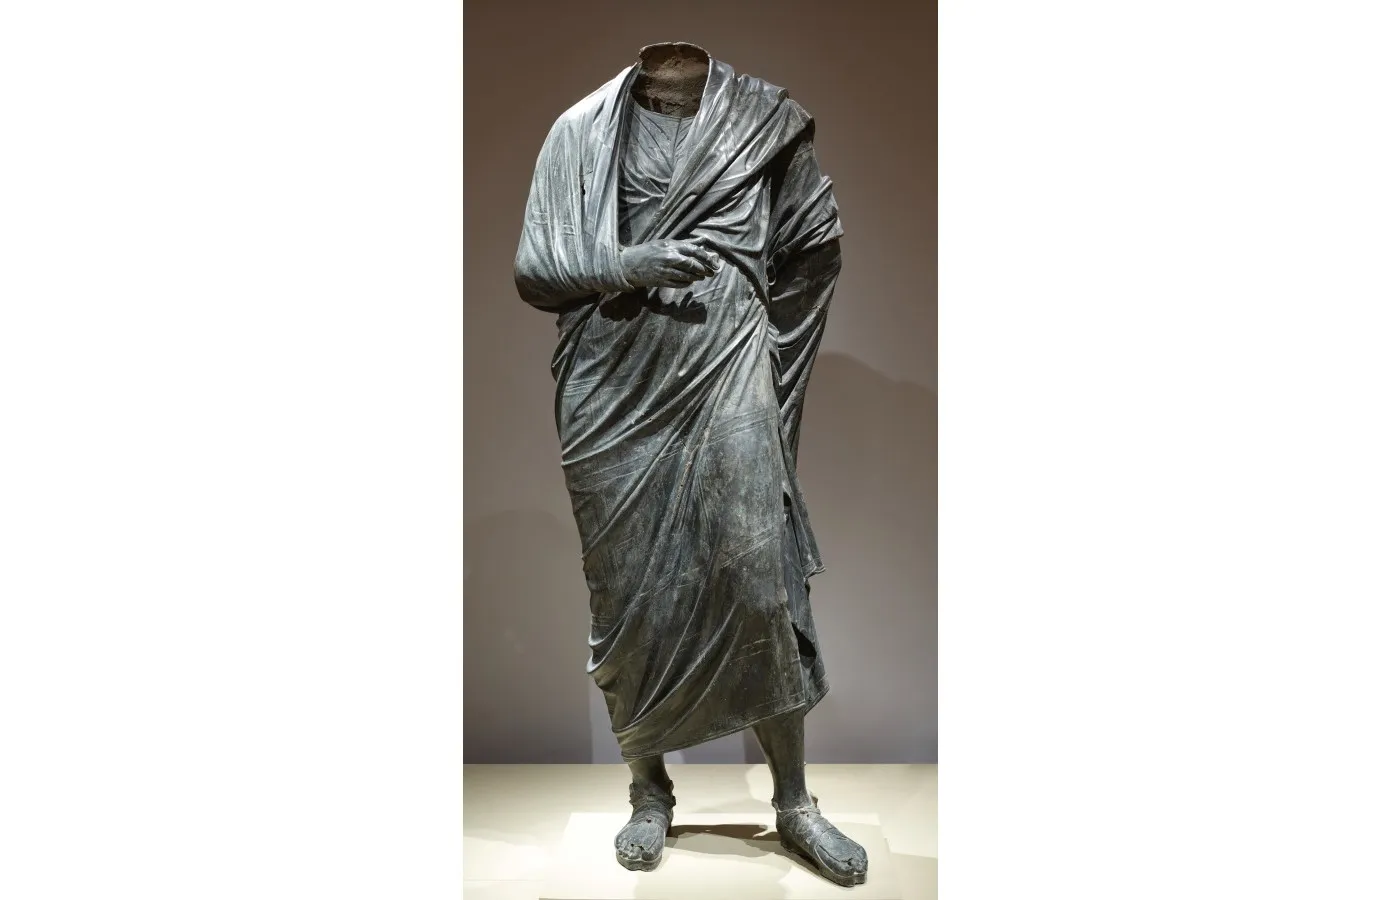 Draped Male Figure, c. 150 BCE–200 CE. Roman or possibly Greek Hellenistic. Bronze, hollow cast in several pieces and joined; overall: 193 cm (76 in.). The Cleveland Museum of Art, Leonard C. Hanna, Jr. Fund 1986.5